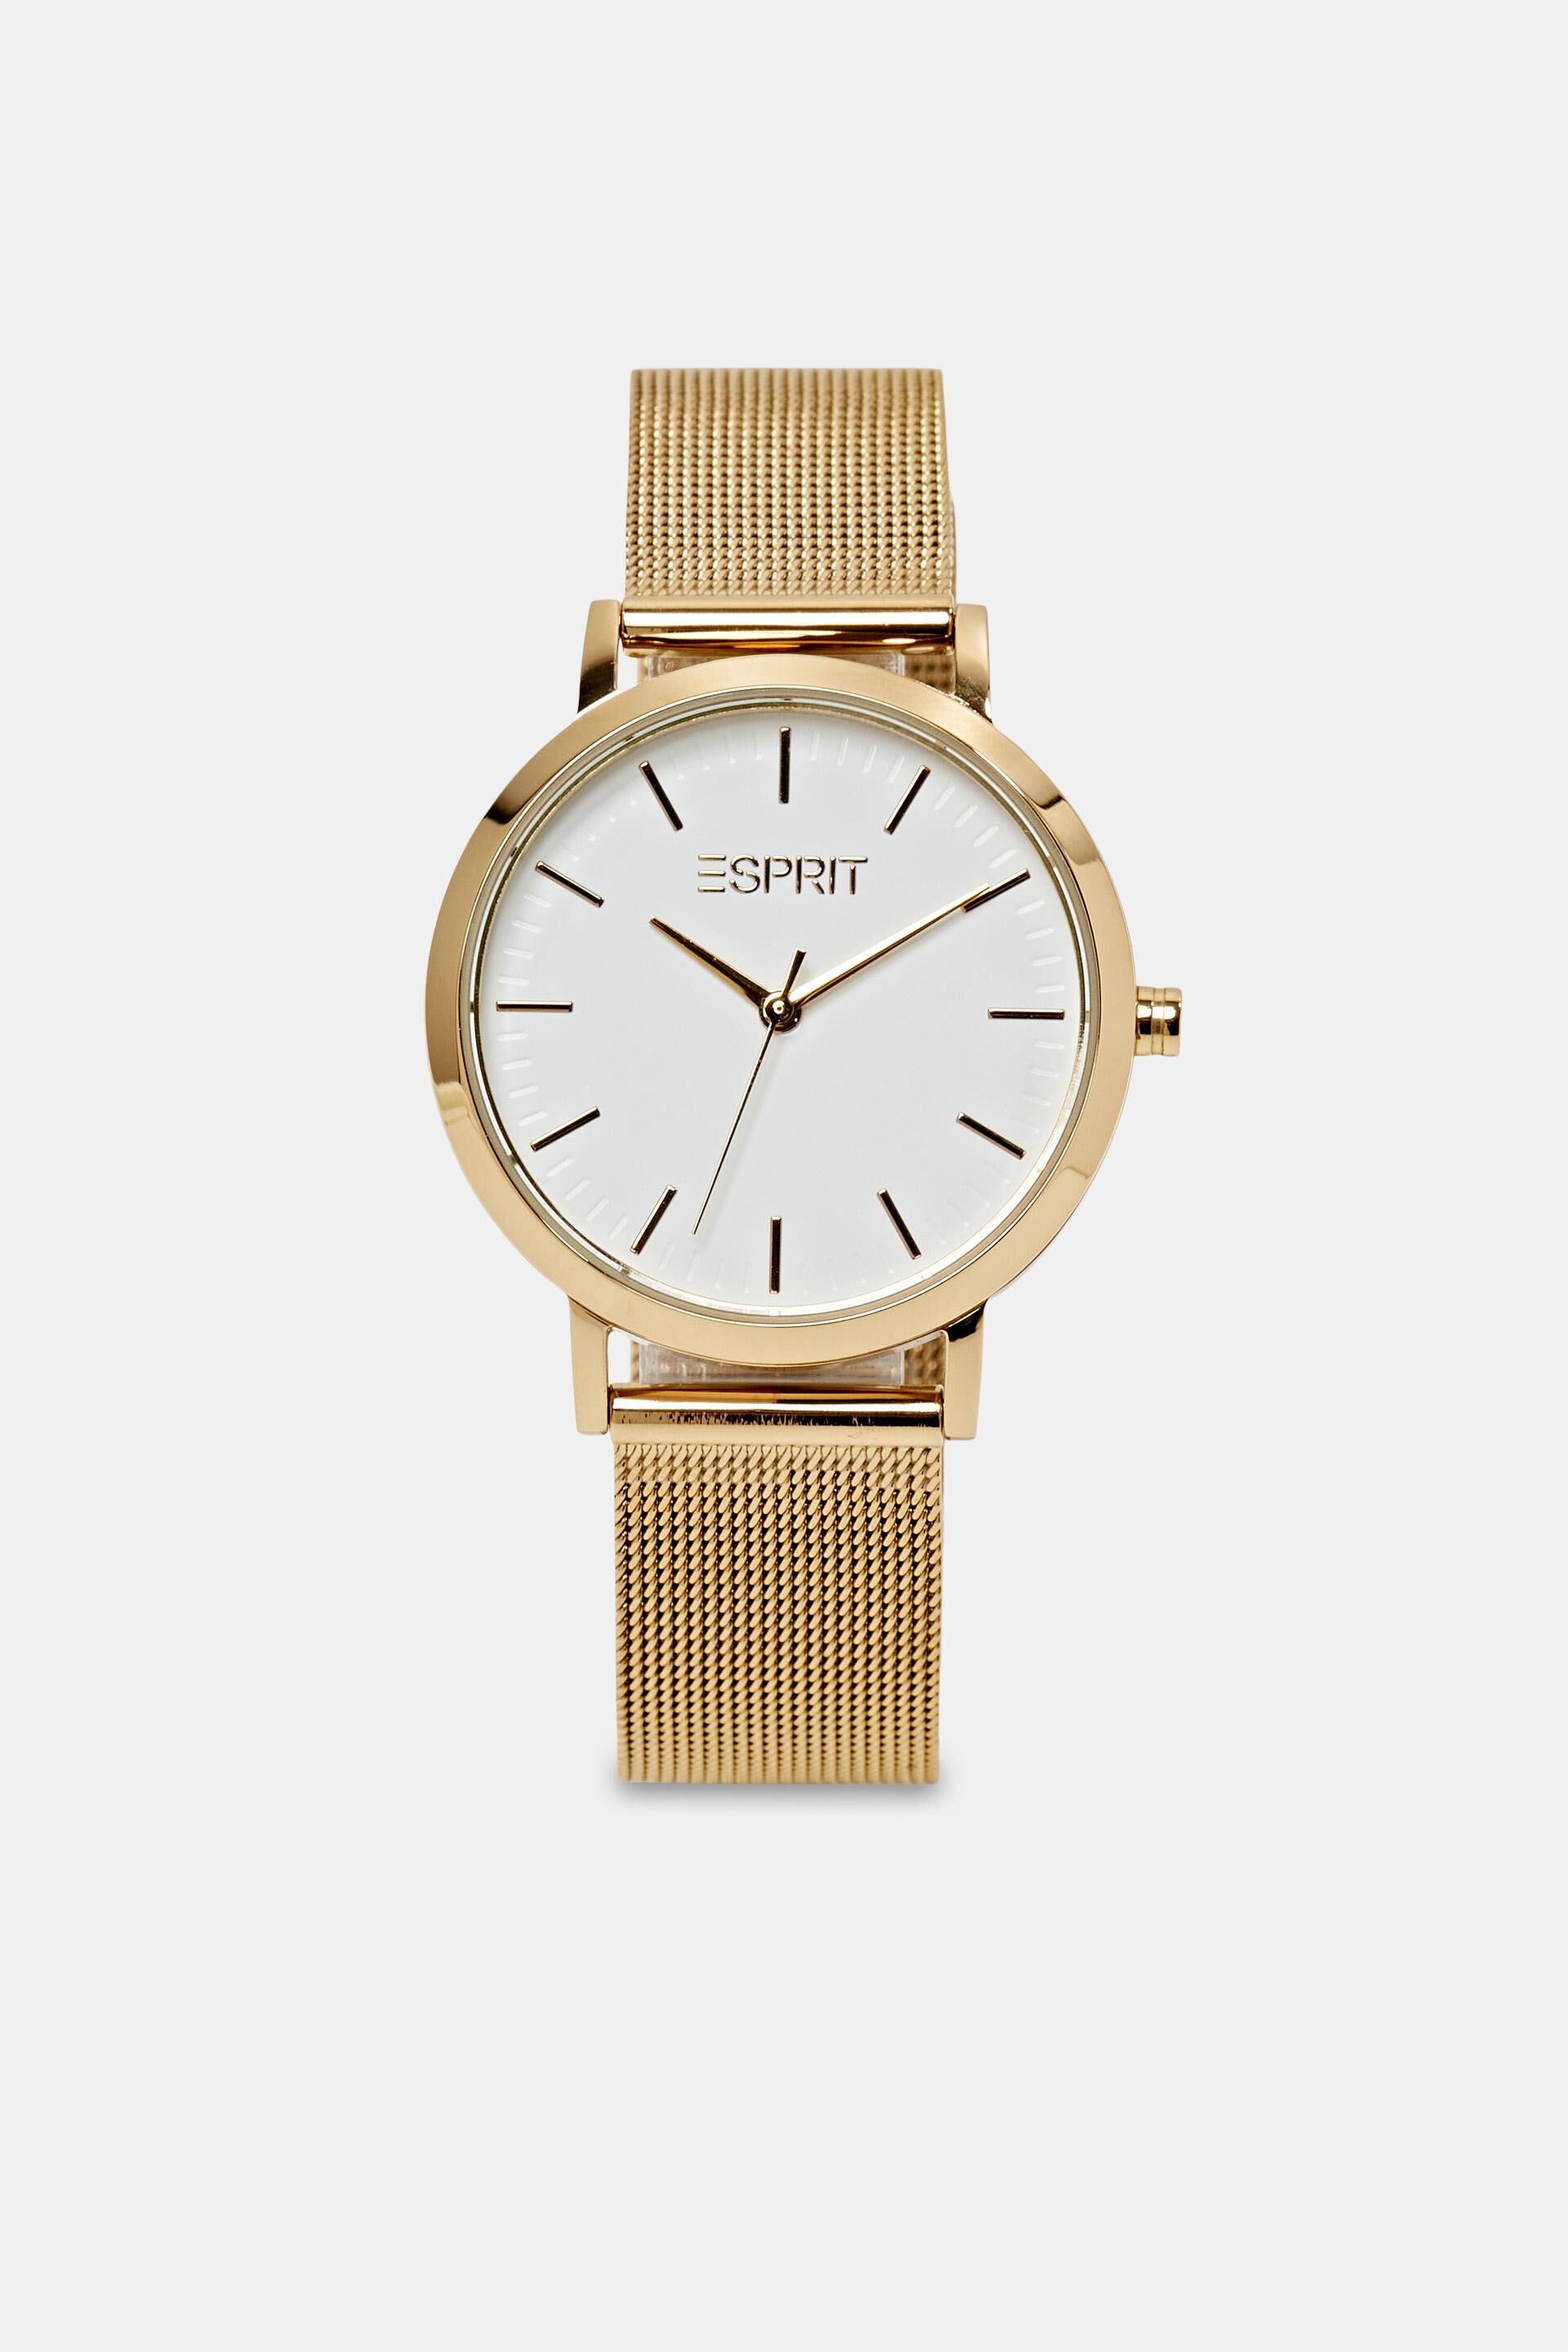 Esprit Online Store Stainless steel watch with a strap mesh